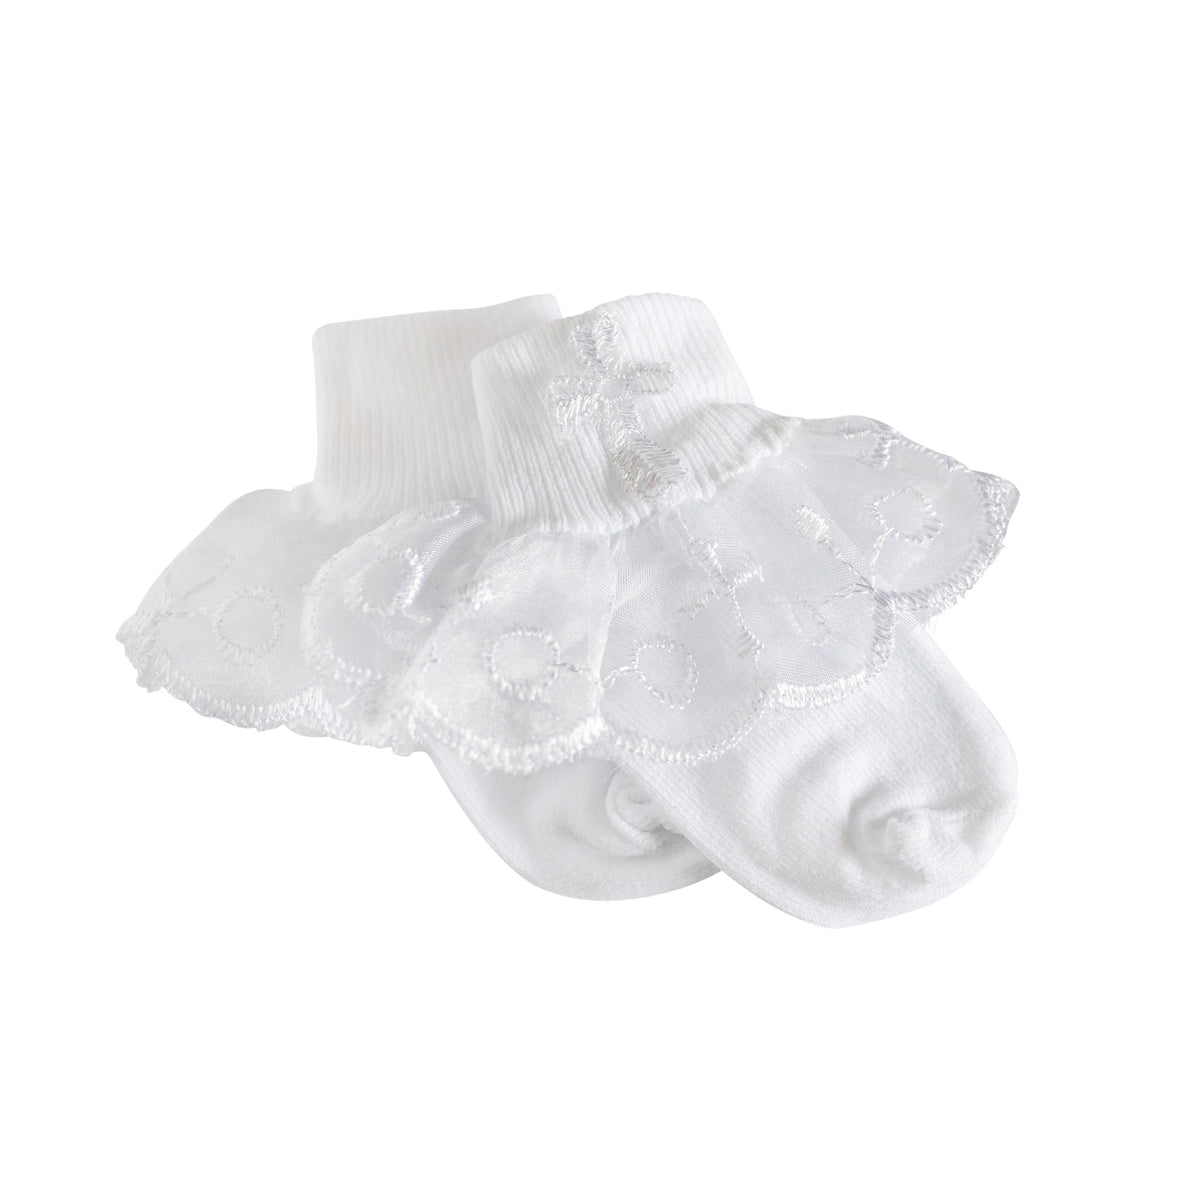 White Lace Baby Christening Socks with Cross